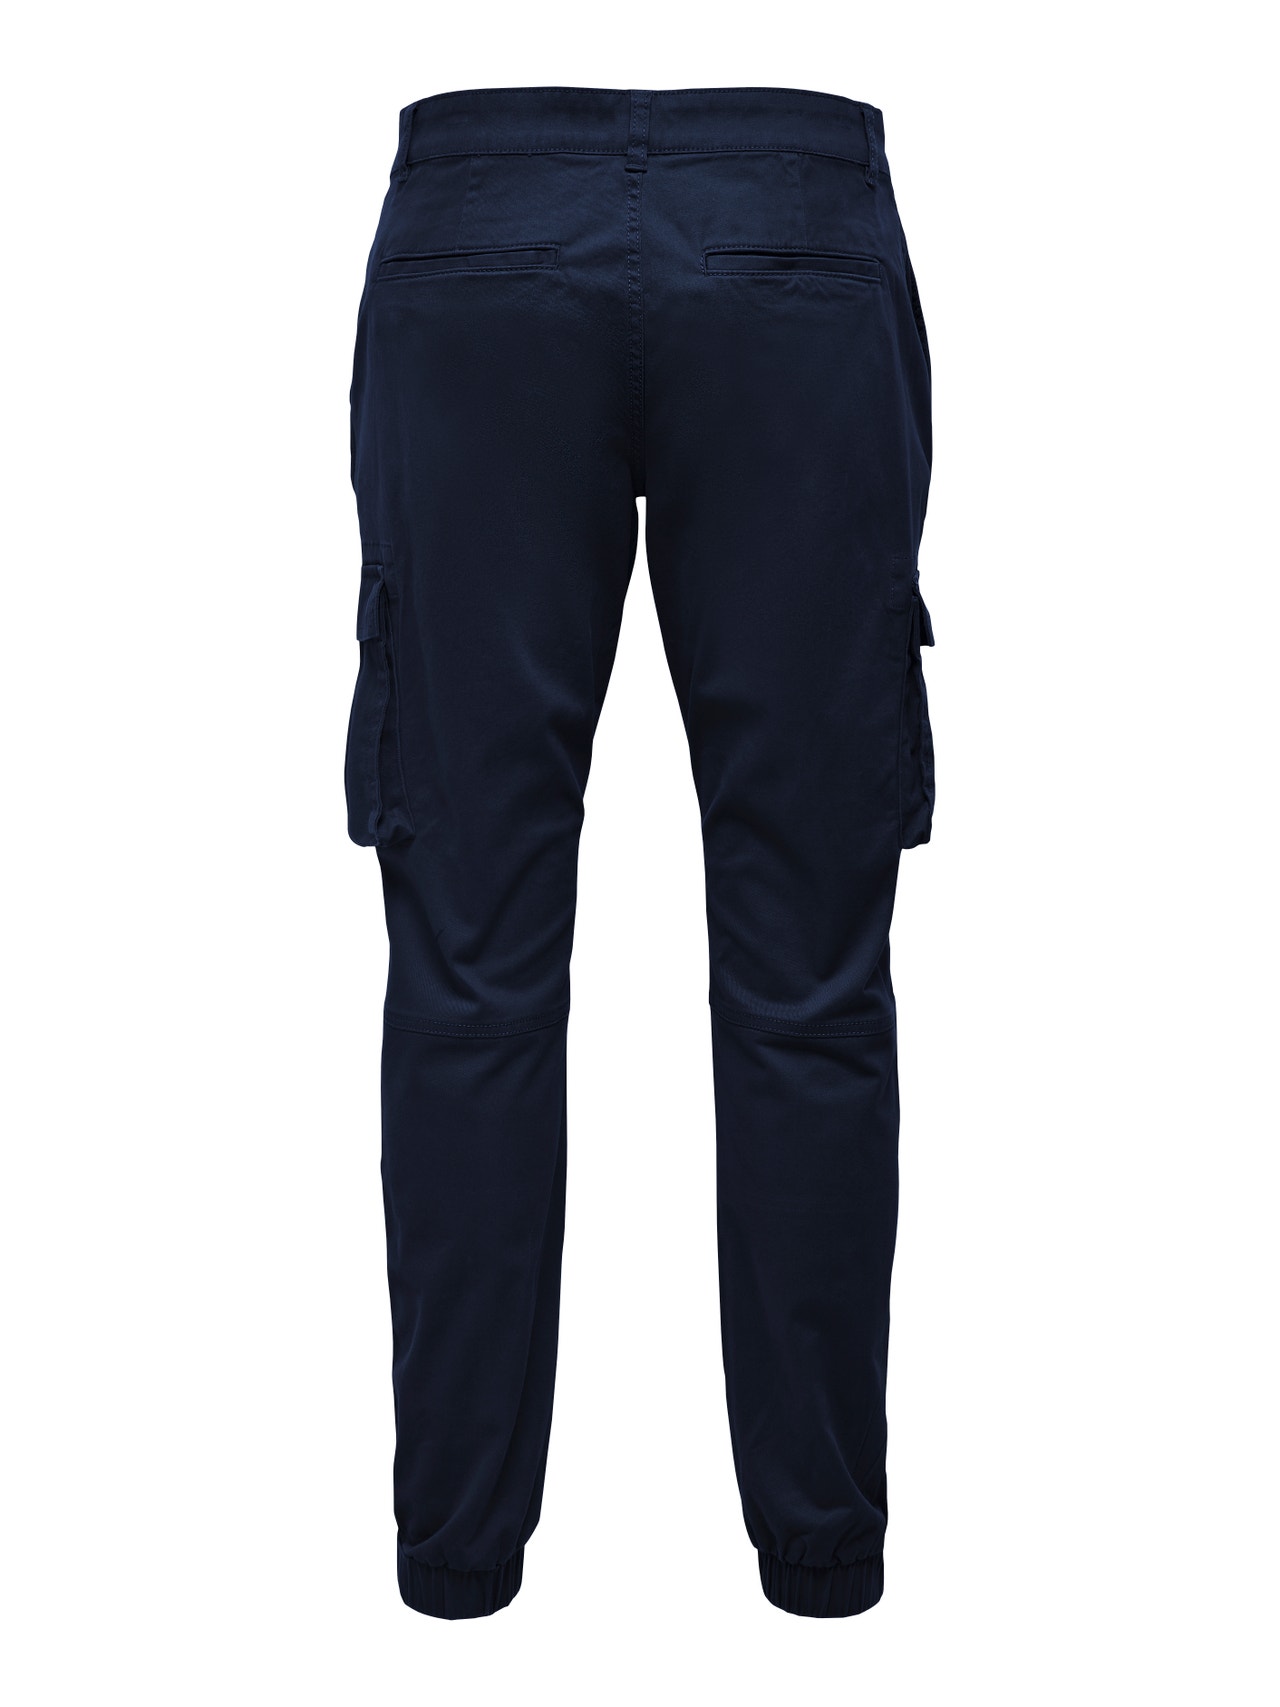 ONLY & SONS Tapered Fit Elasticated hems Trousers -Dark Navy - 22016687